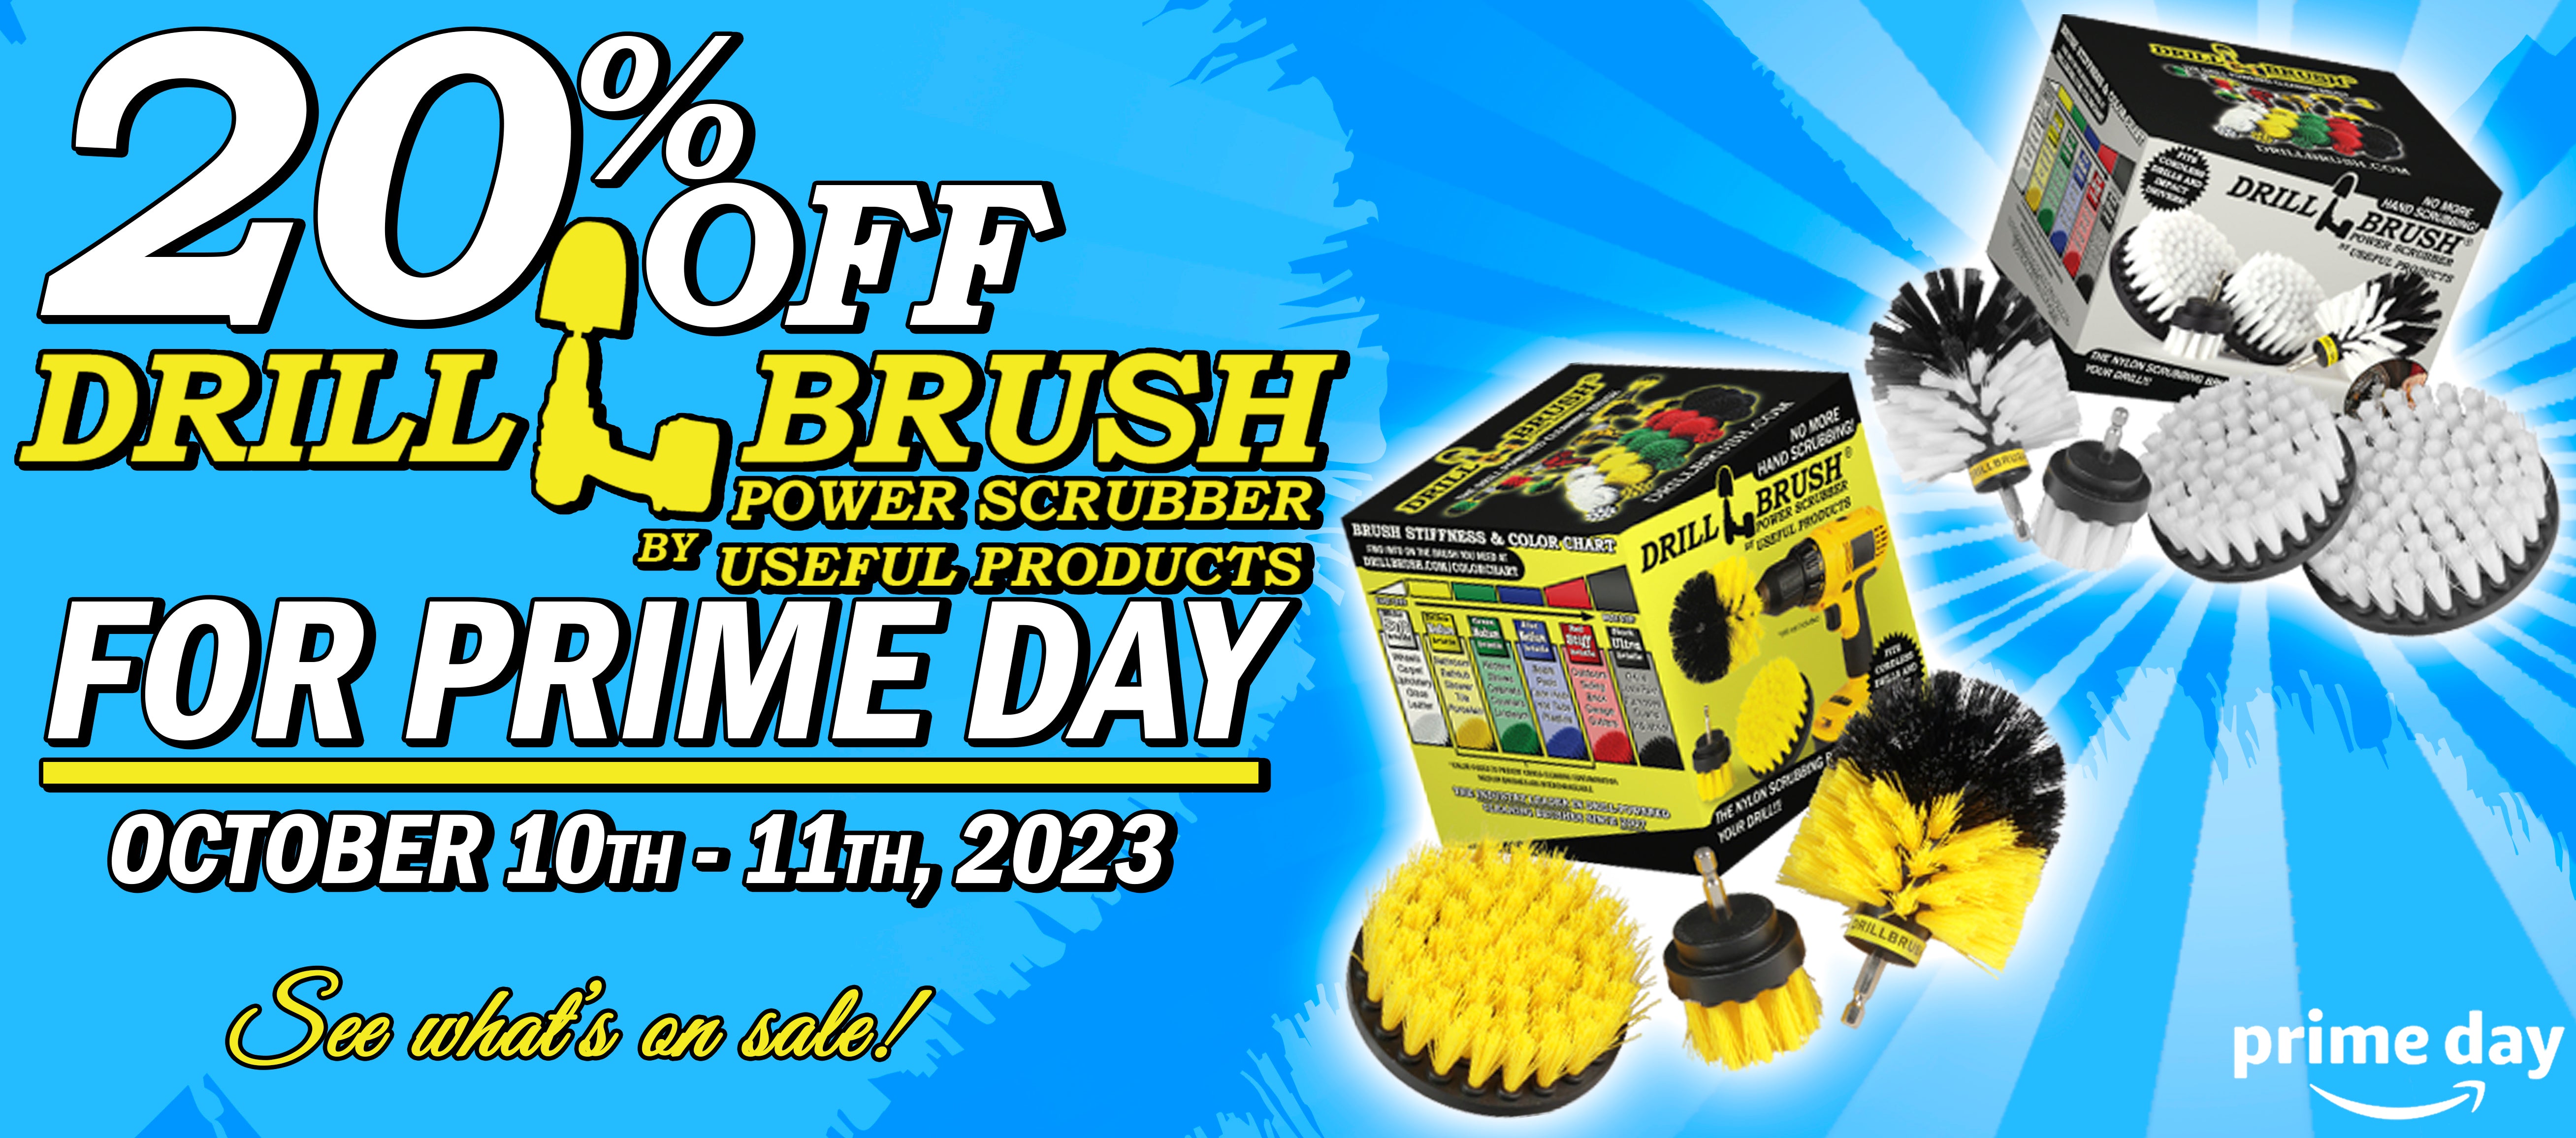 Get 20% Off Drillbrush Kits During Prime Day 2023